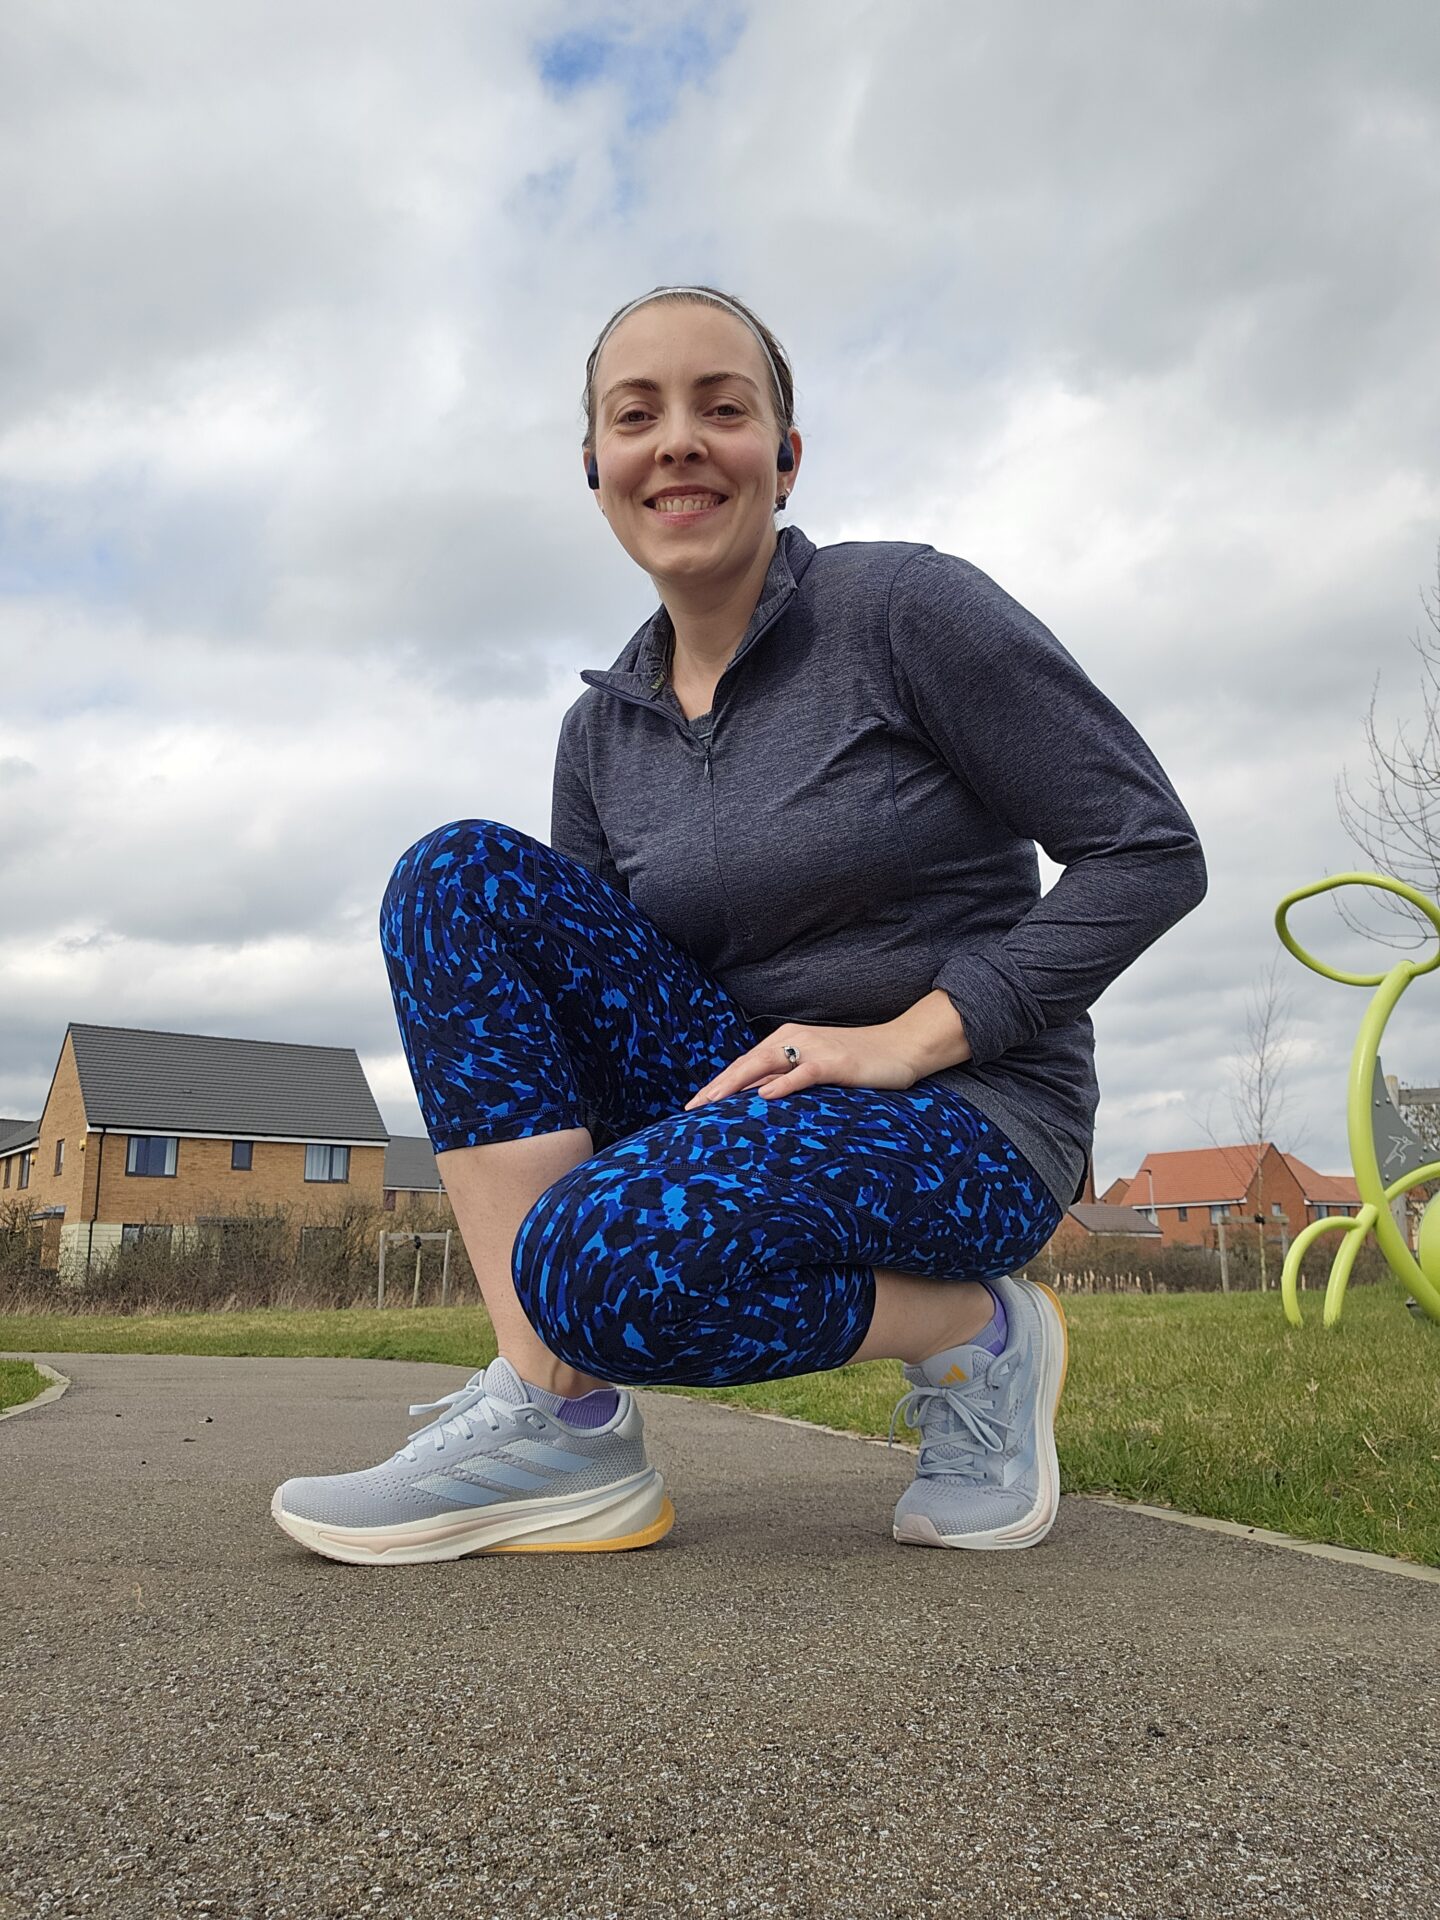 Woman kneeling down wearing running clothes